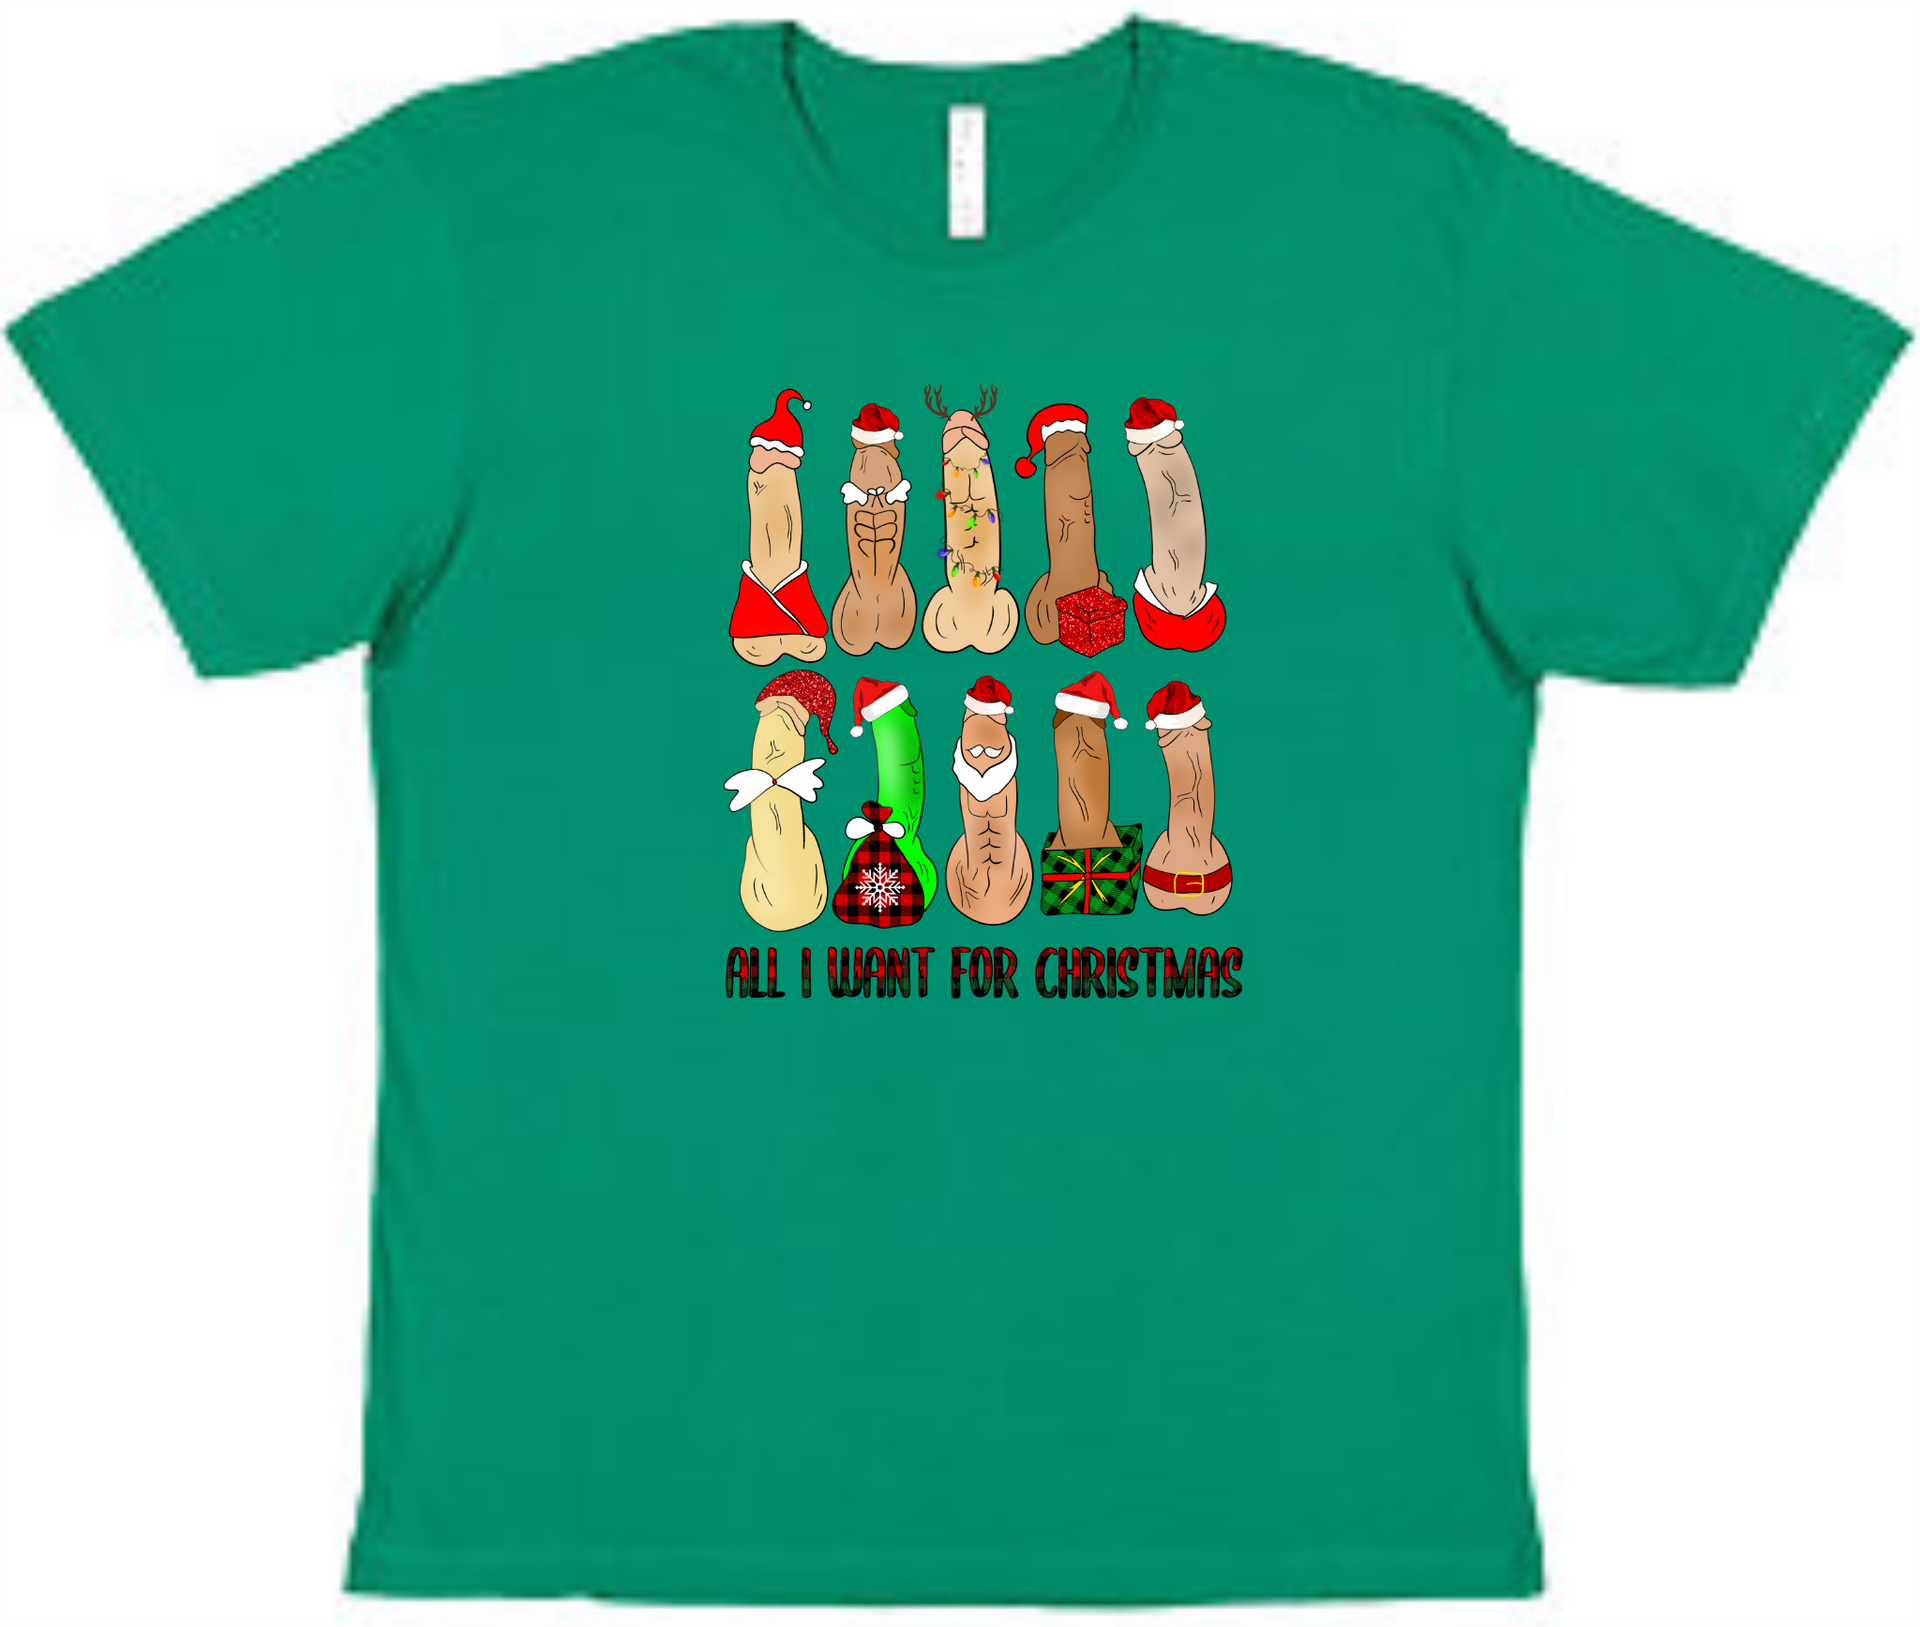 All I want for Christmas Tee Adult Shirt by Akron Pride Custom Tees | Akron Pride Custom Tees